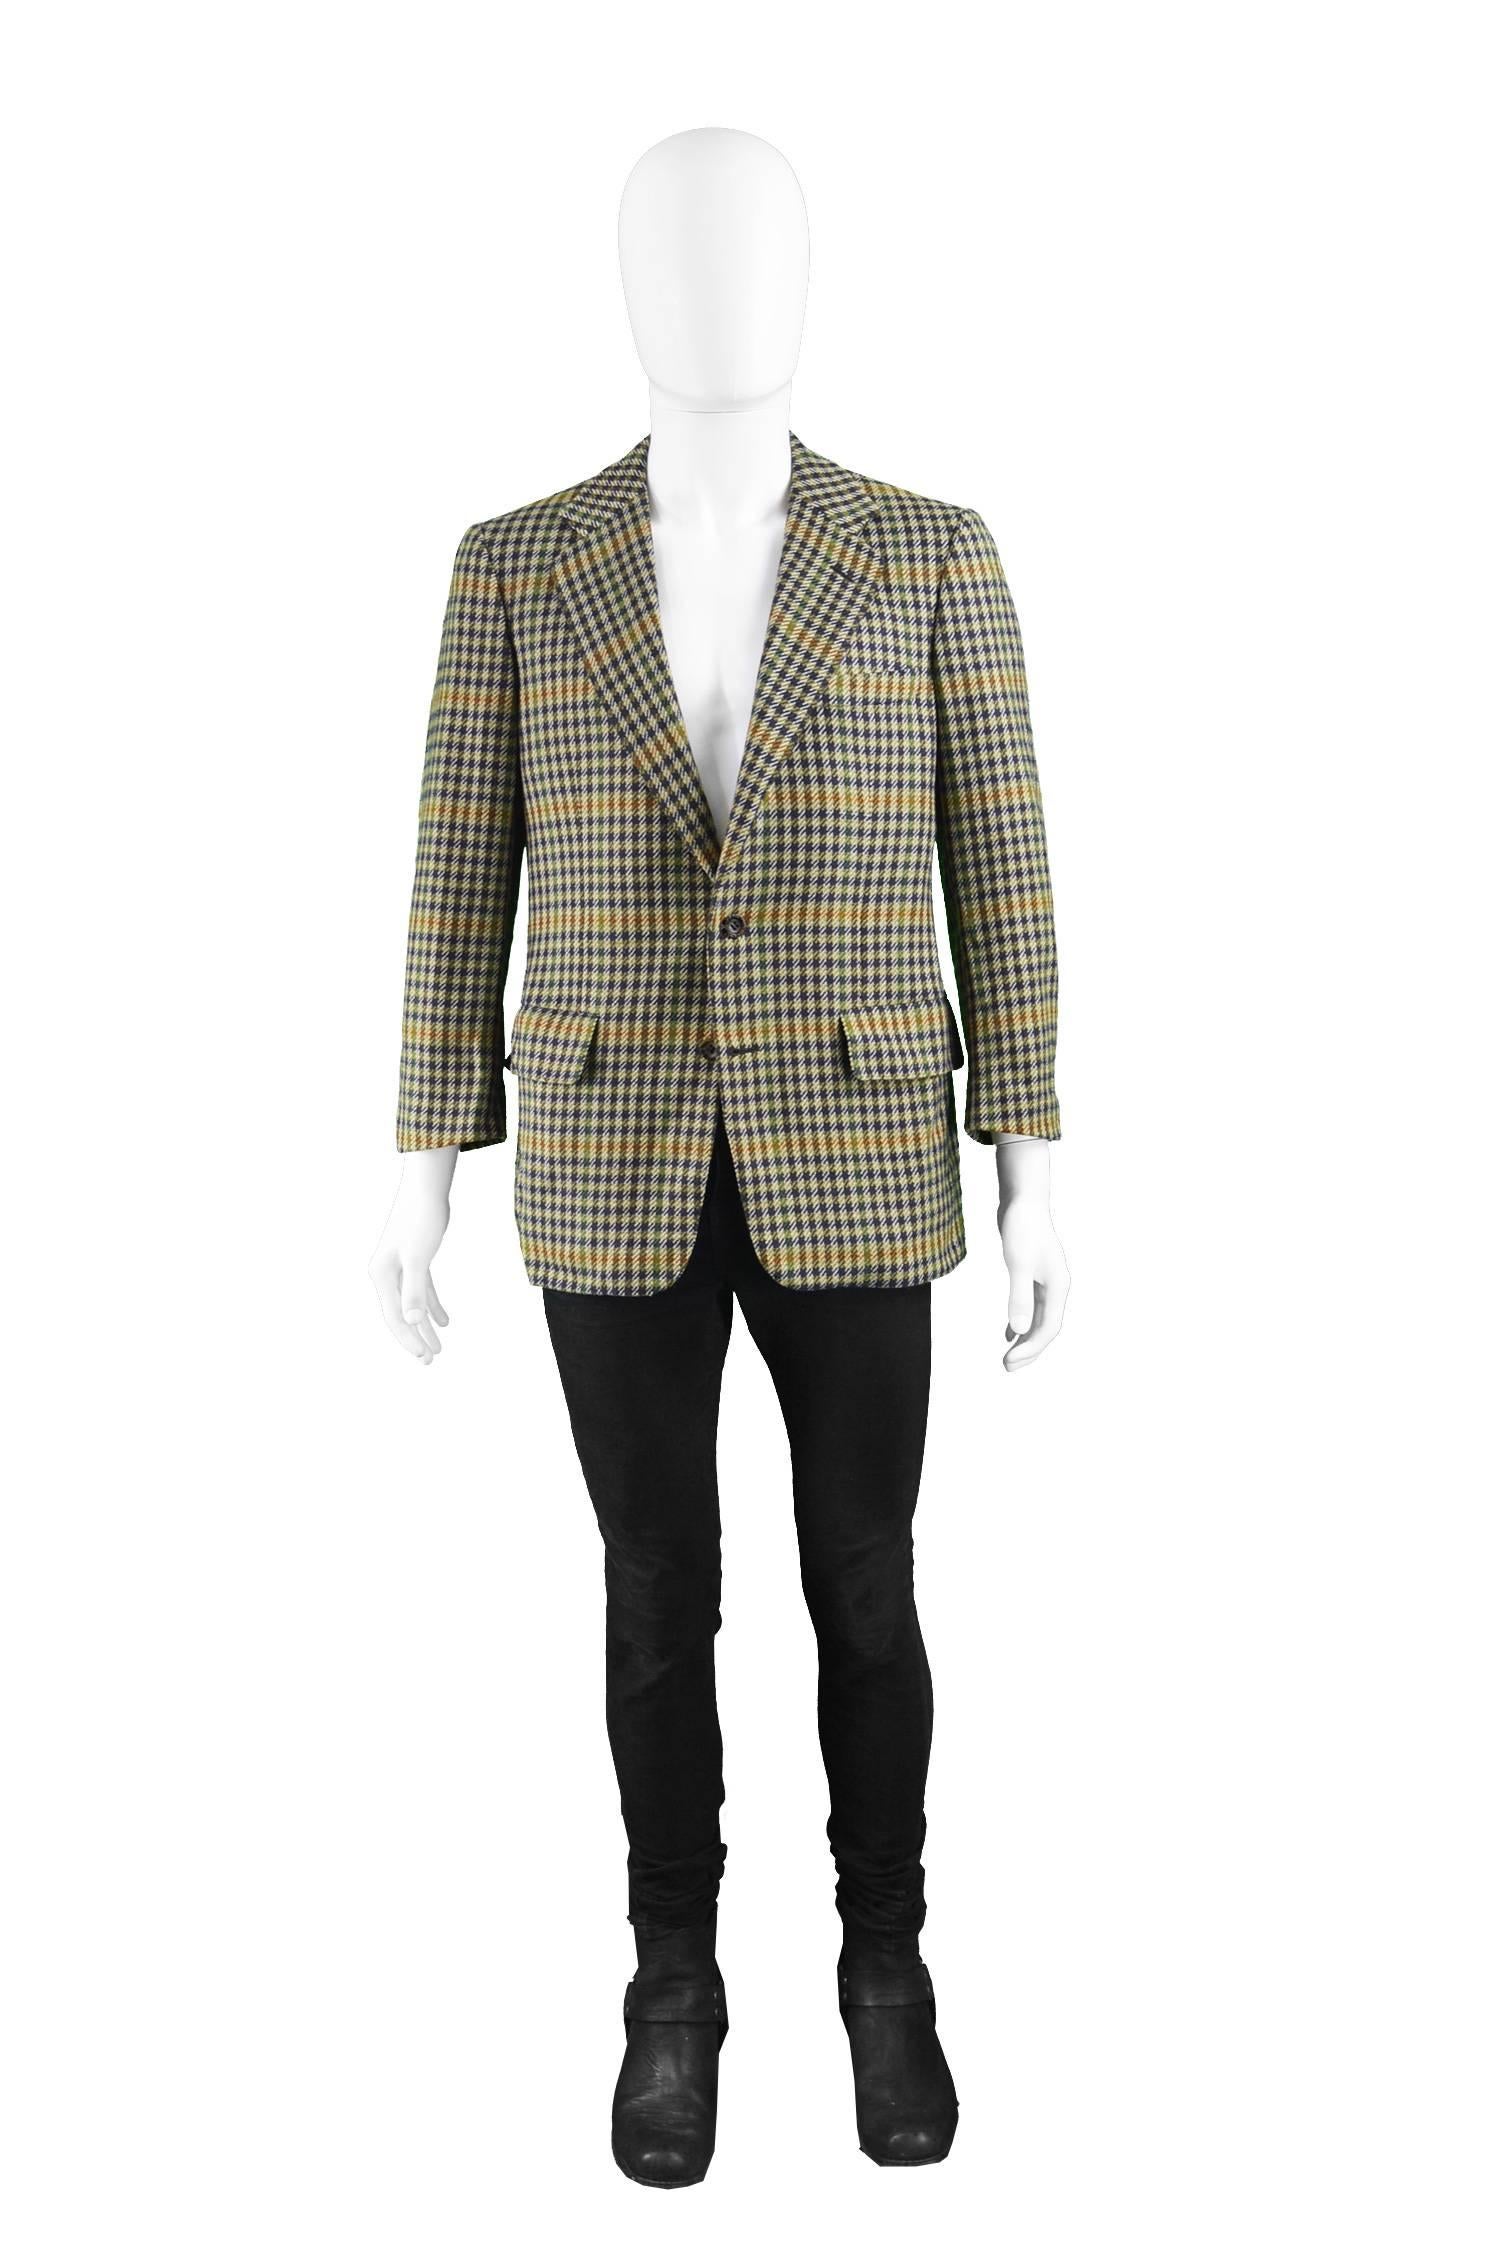 Chester Barrie for Harrods Men's Vintage Pure Cashmere Checked Jacket, 1970s

Size: Marked 40R but may have been tailored as it now fits like a men's Short Small due to short sleeves. Please check all measurements
Chest - 40” / 101cm (please allow a